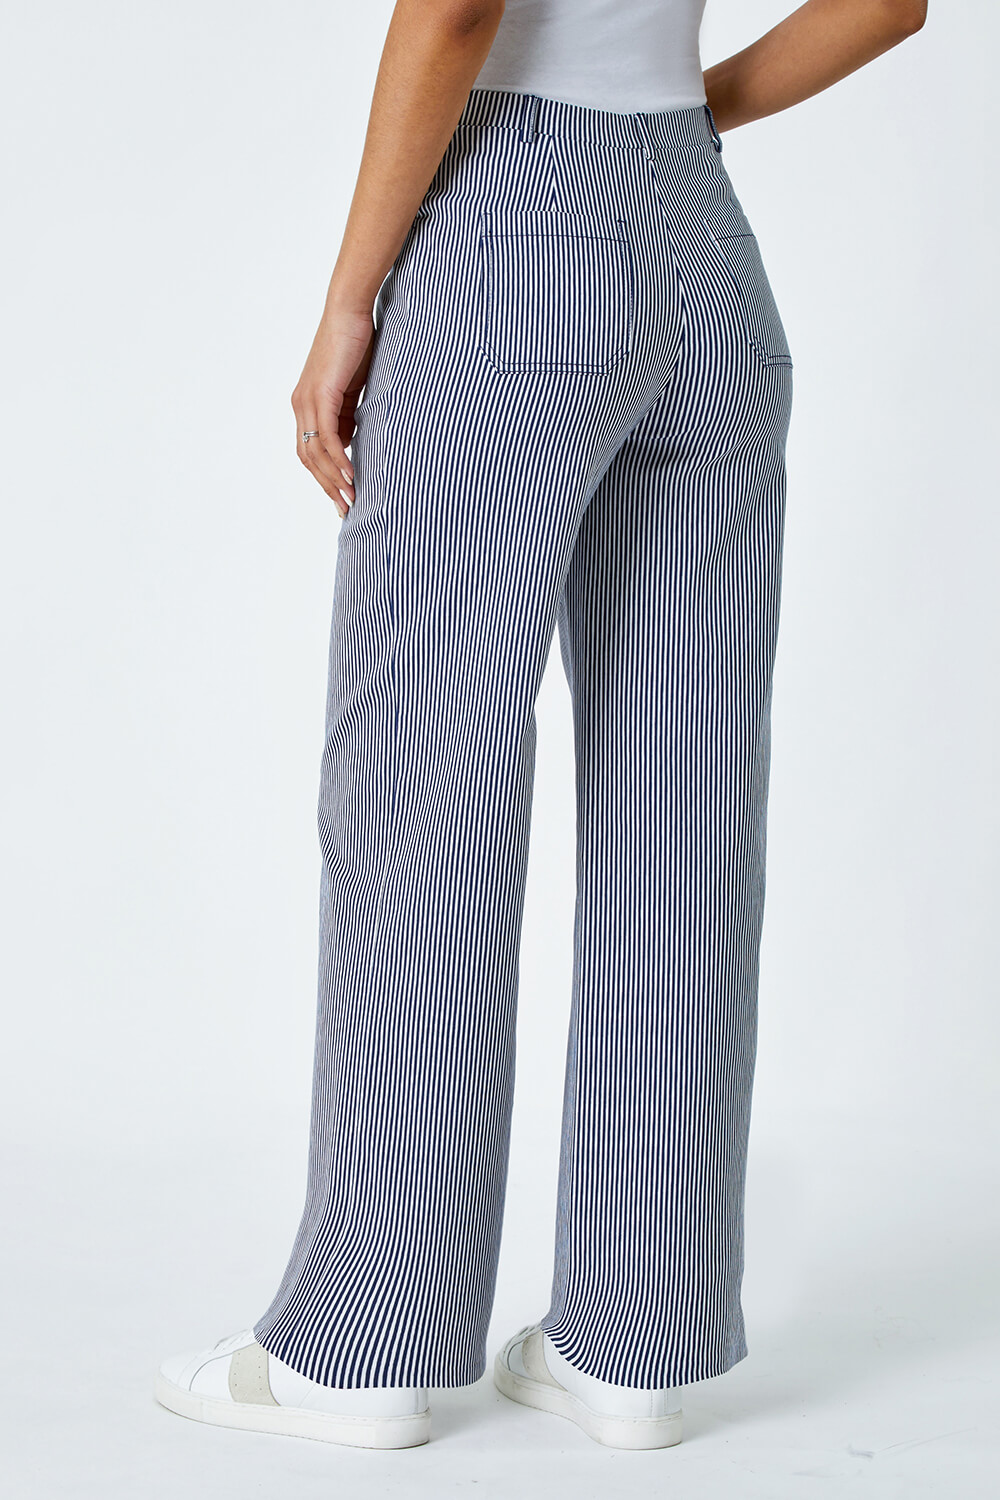 Navy  Striped Wide Leg Stretch Trousers, Image 4 of 5